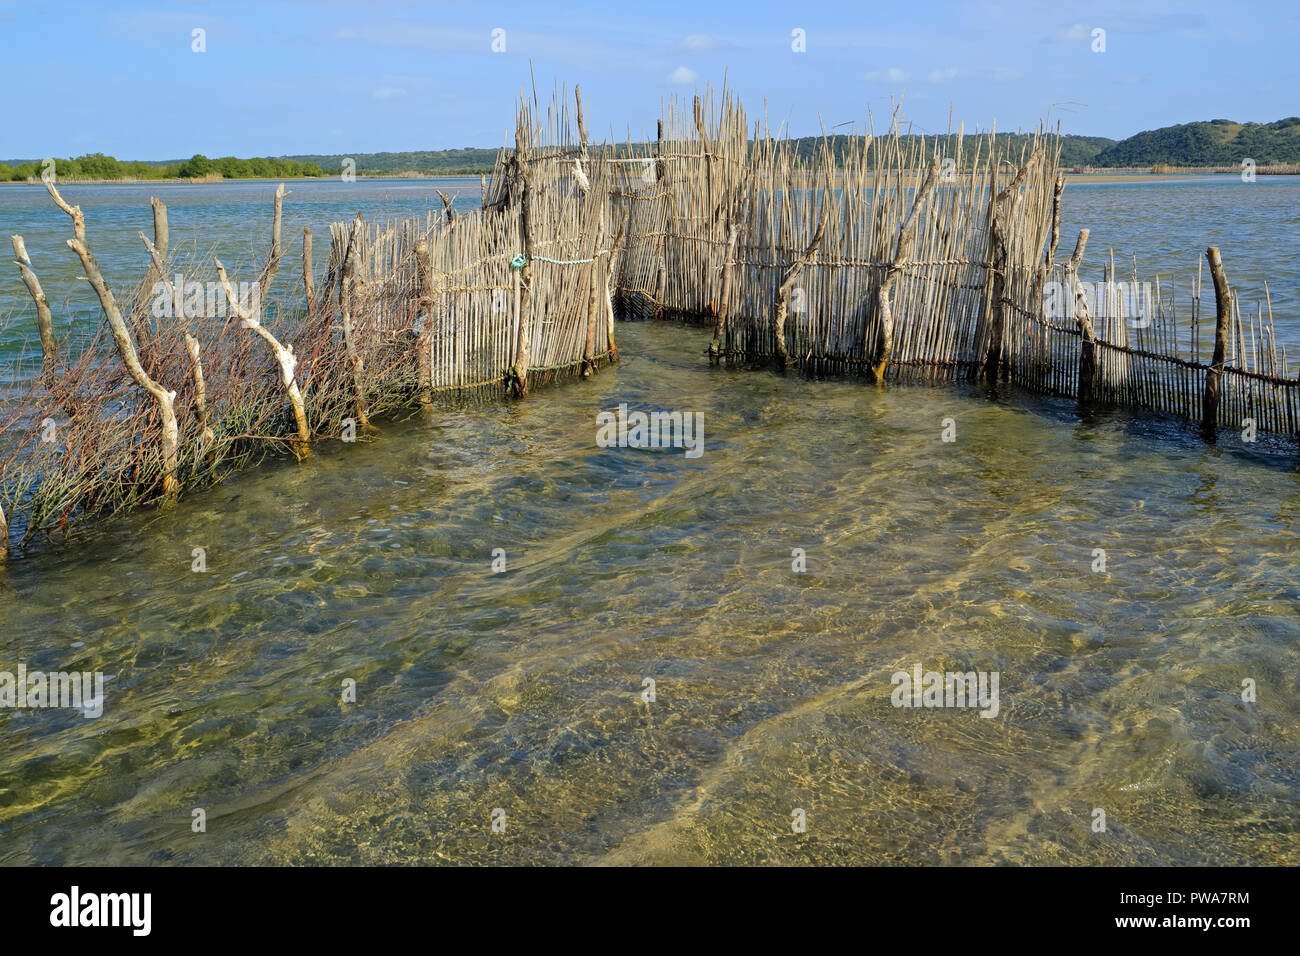 Traditional Tsonga fish trap built in the Kosi Bay estuary, Tongaland, South Africa Stock Photo